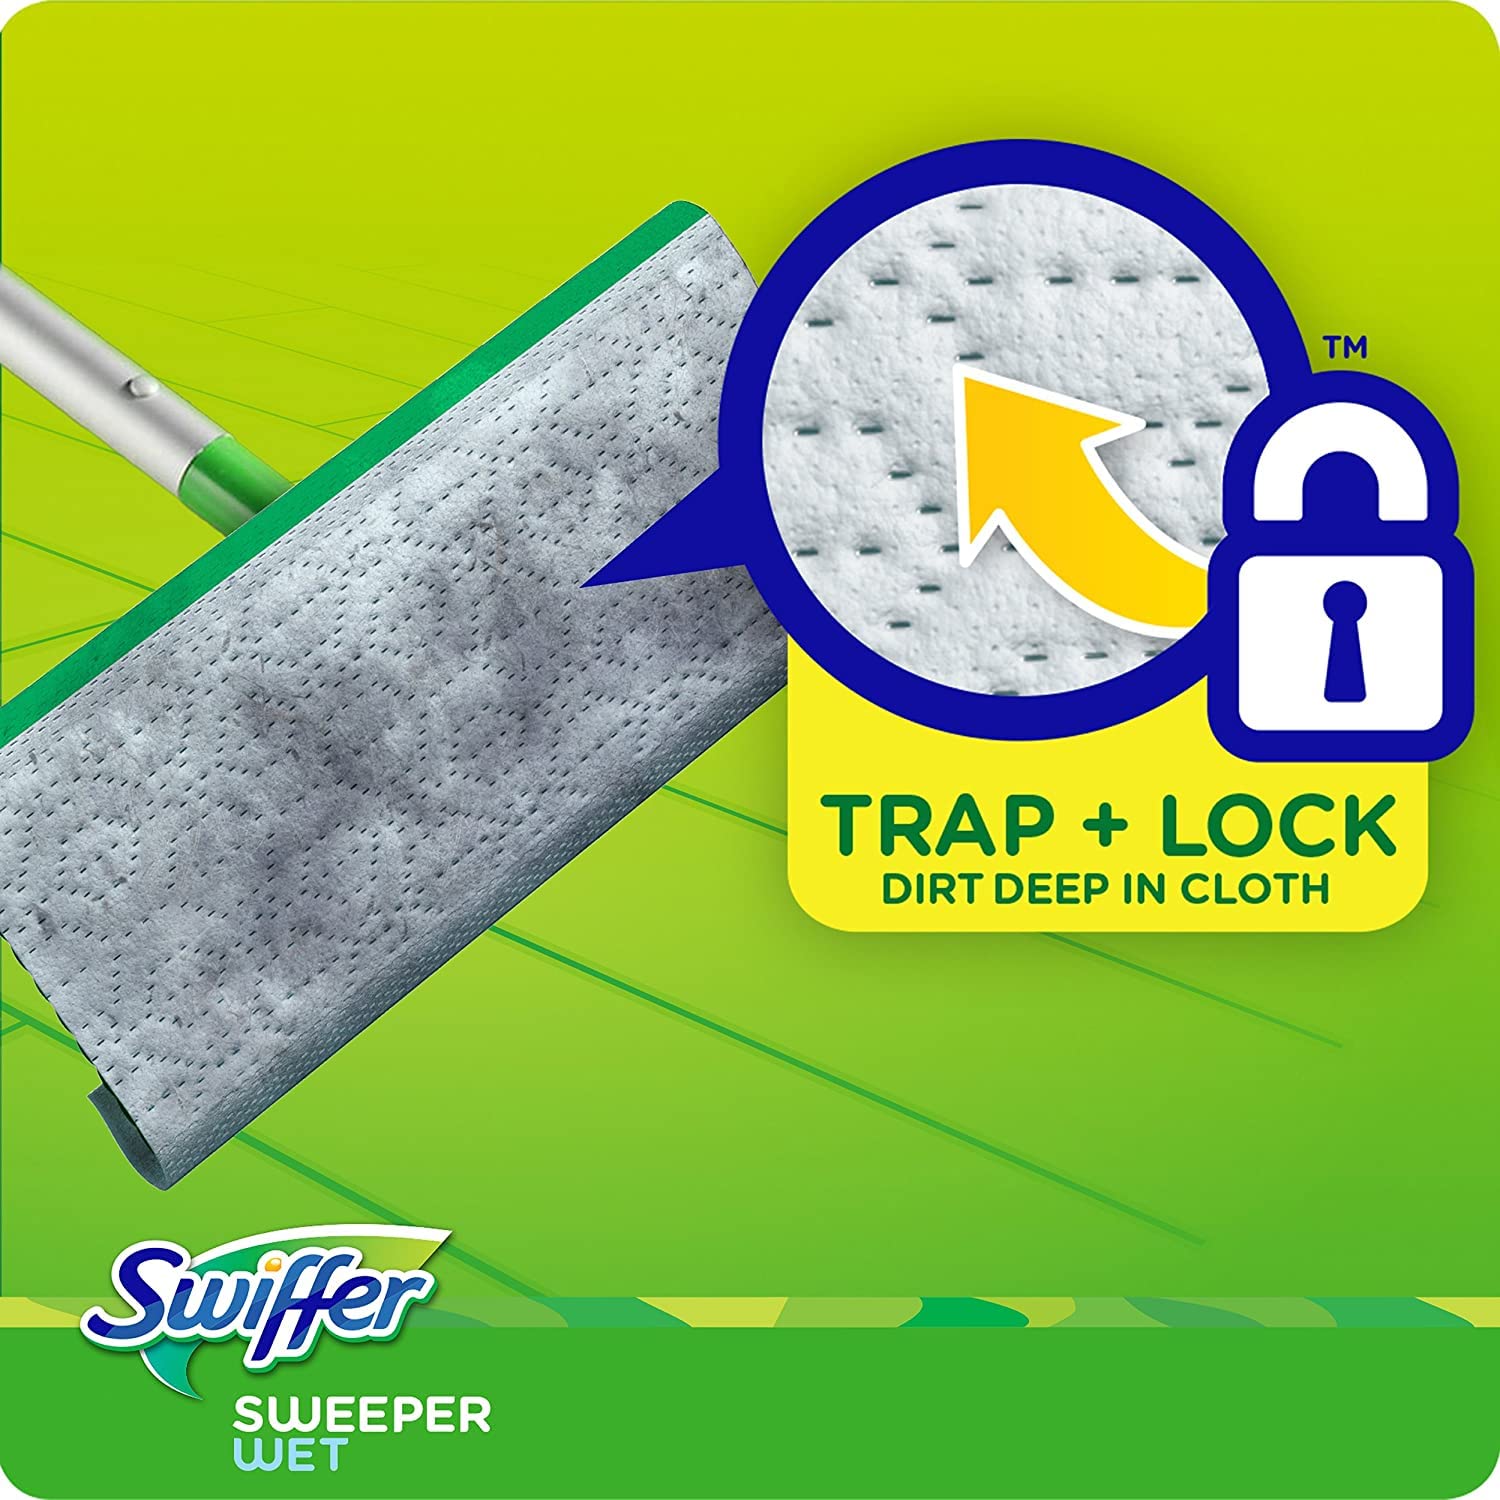 Swiffer Sweeper Wet Mopping Cloths, Multi-Surface Floor Cleaner with Gain Original Scent, 24 Count